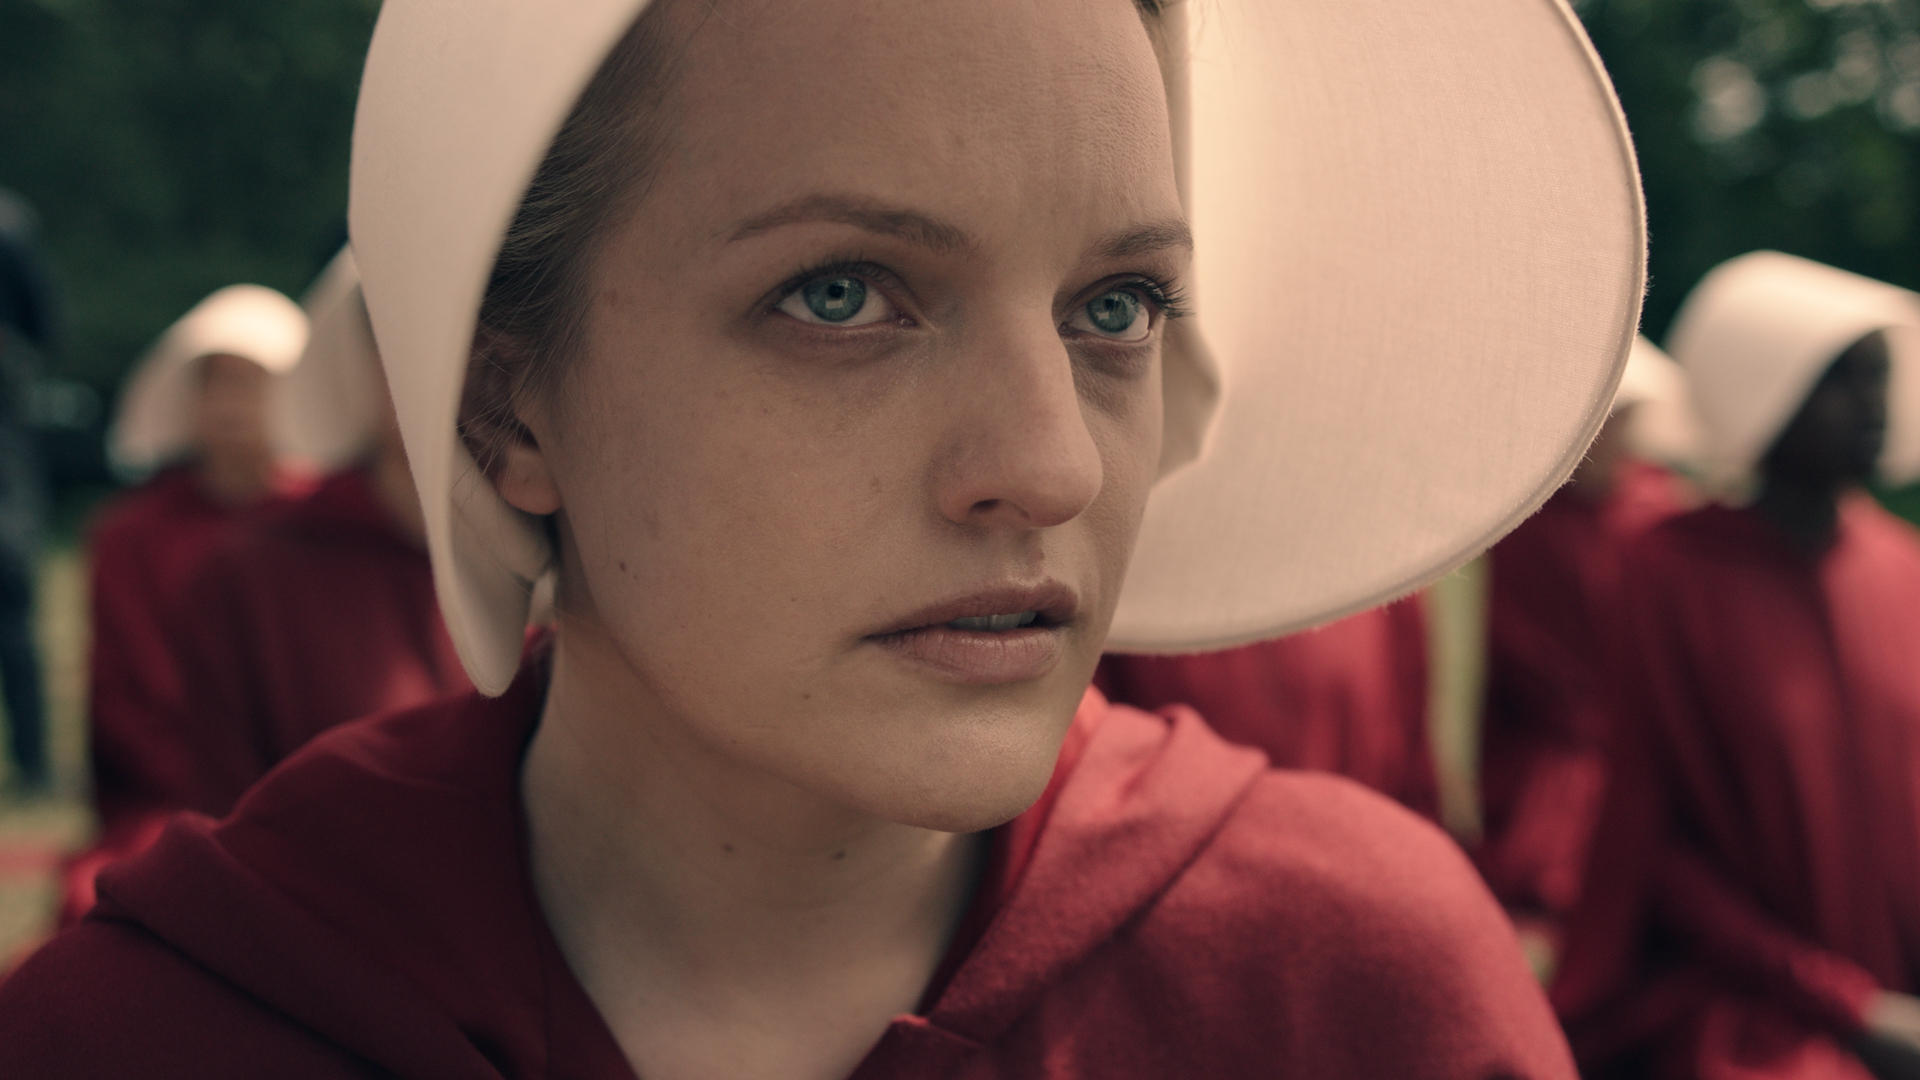 ‘The Handmaid’s Tale wins Hulu its first Emmy Awards, including Best Drama